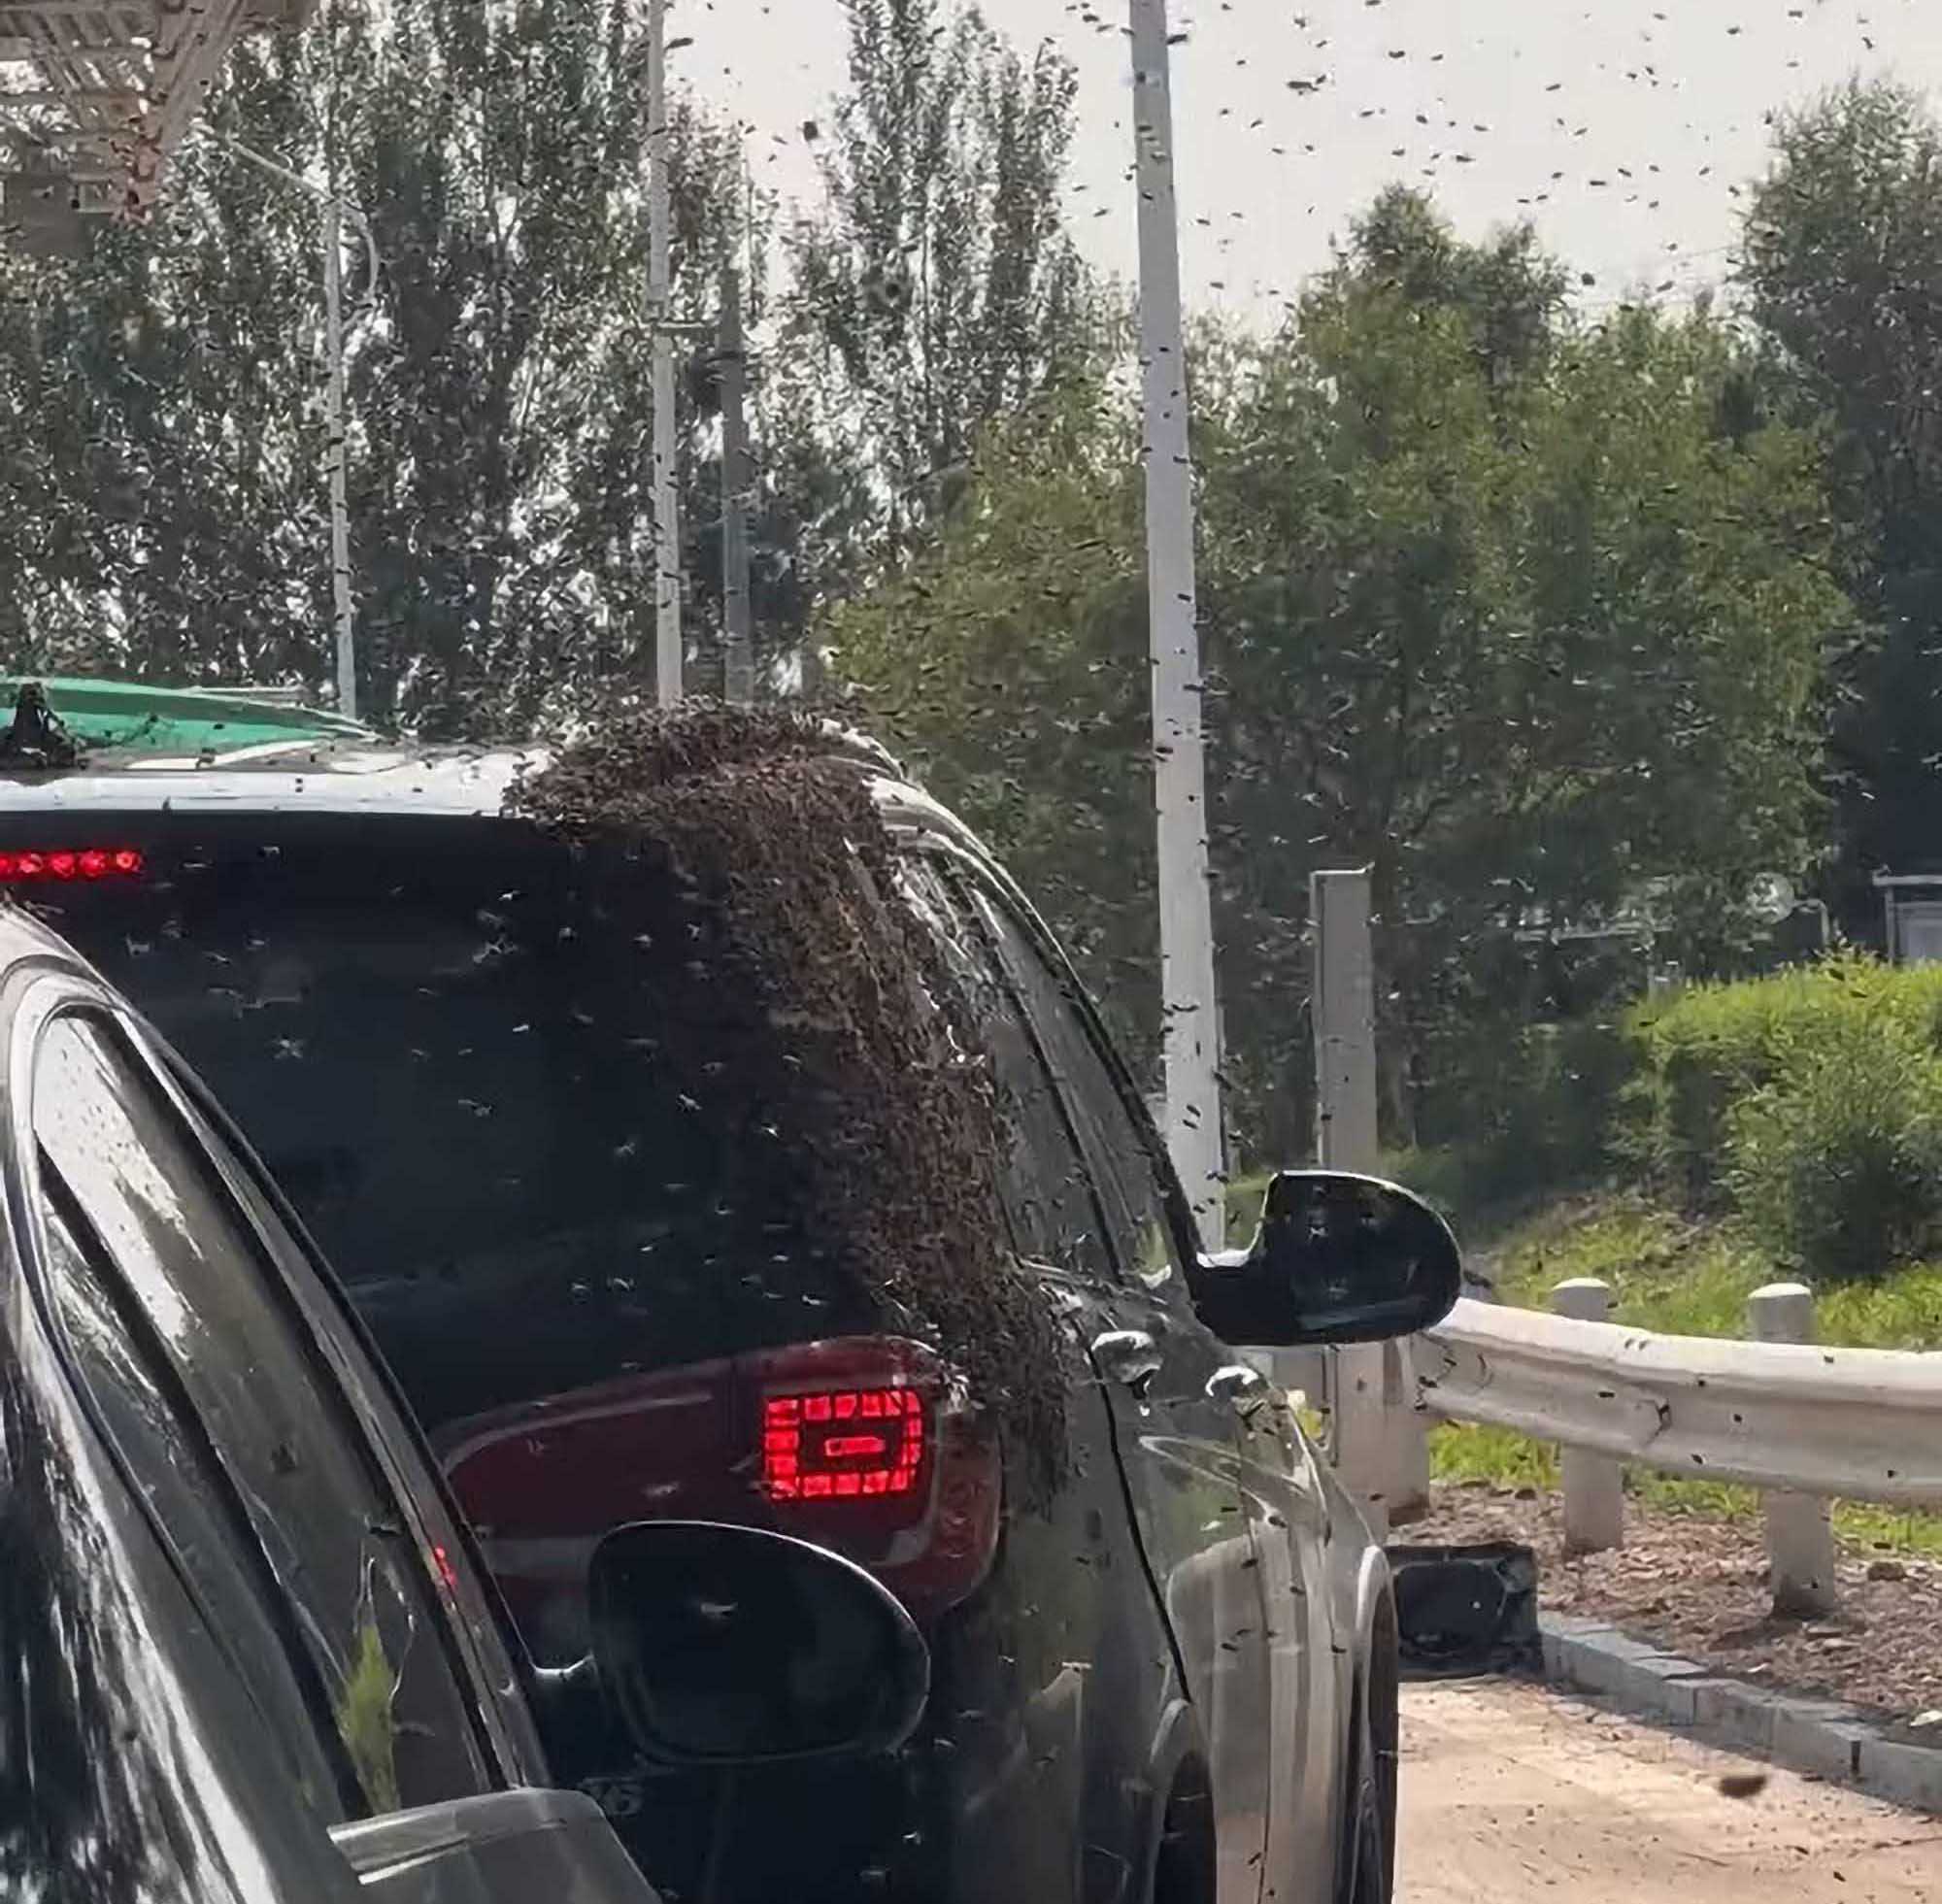 Thousands Of Bees Swarm Toll Station After…